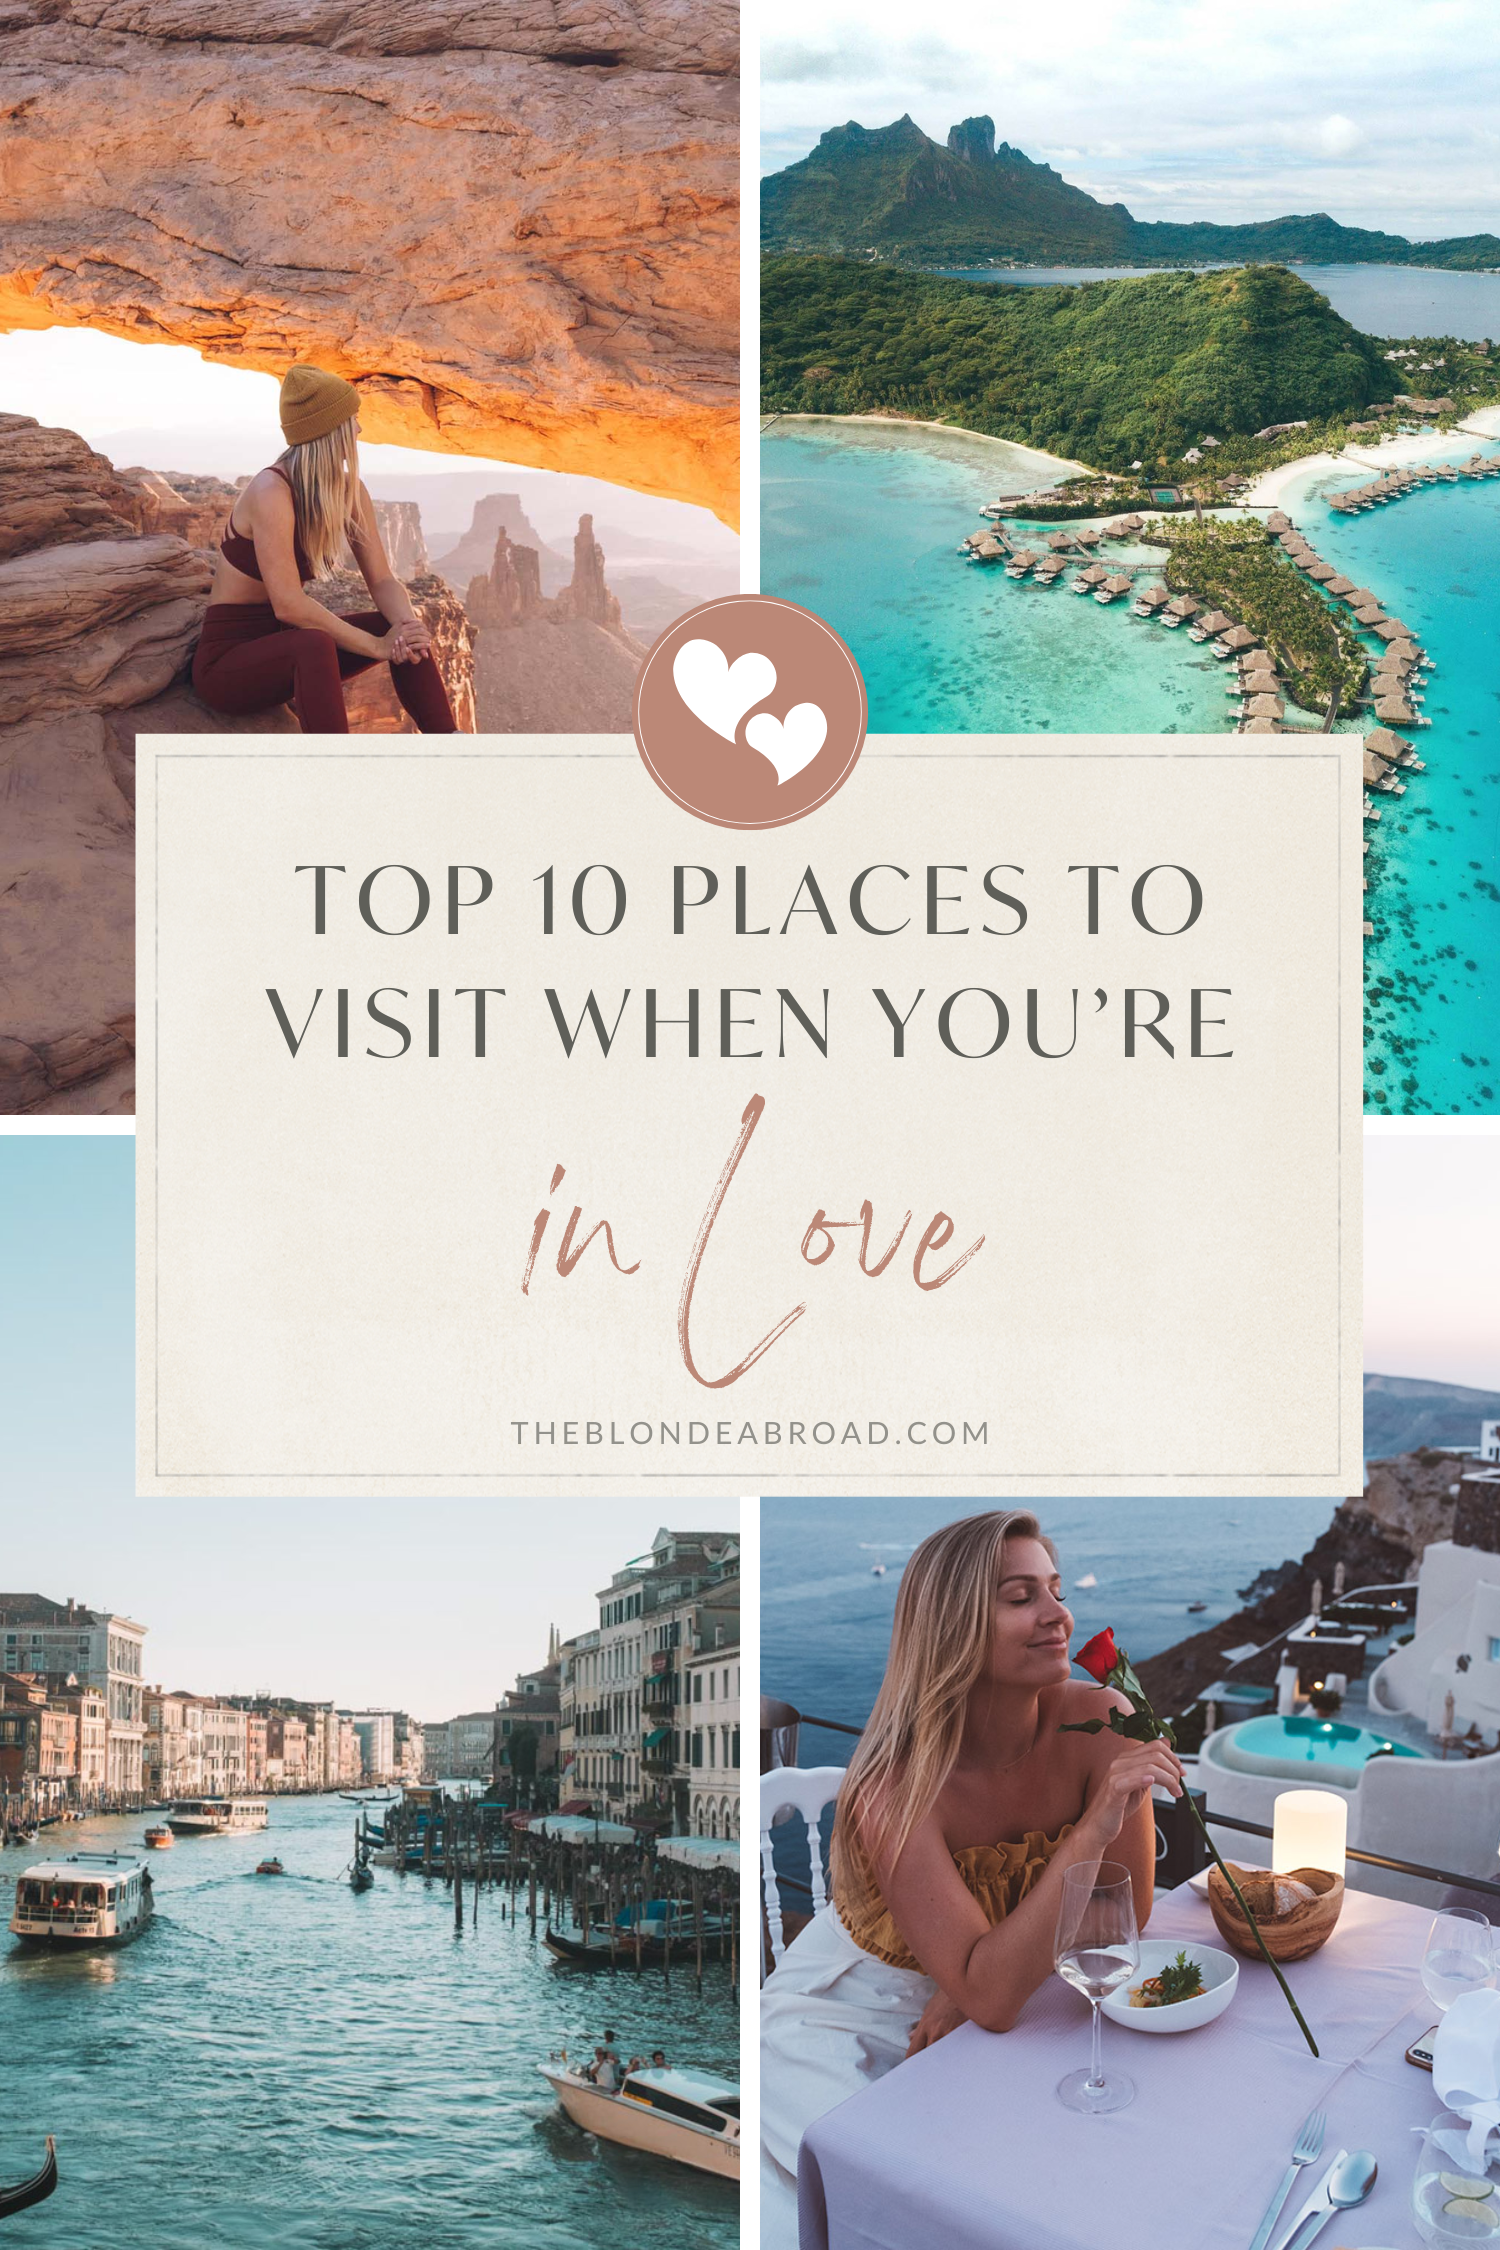 Top 10 Places to Visit When You’re In Love